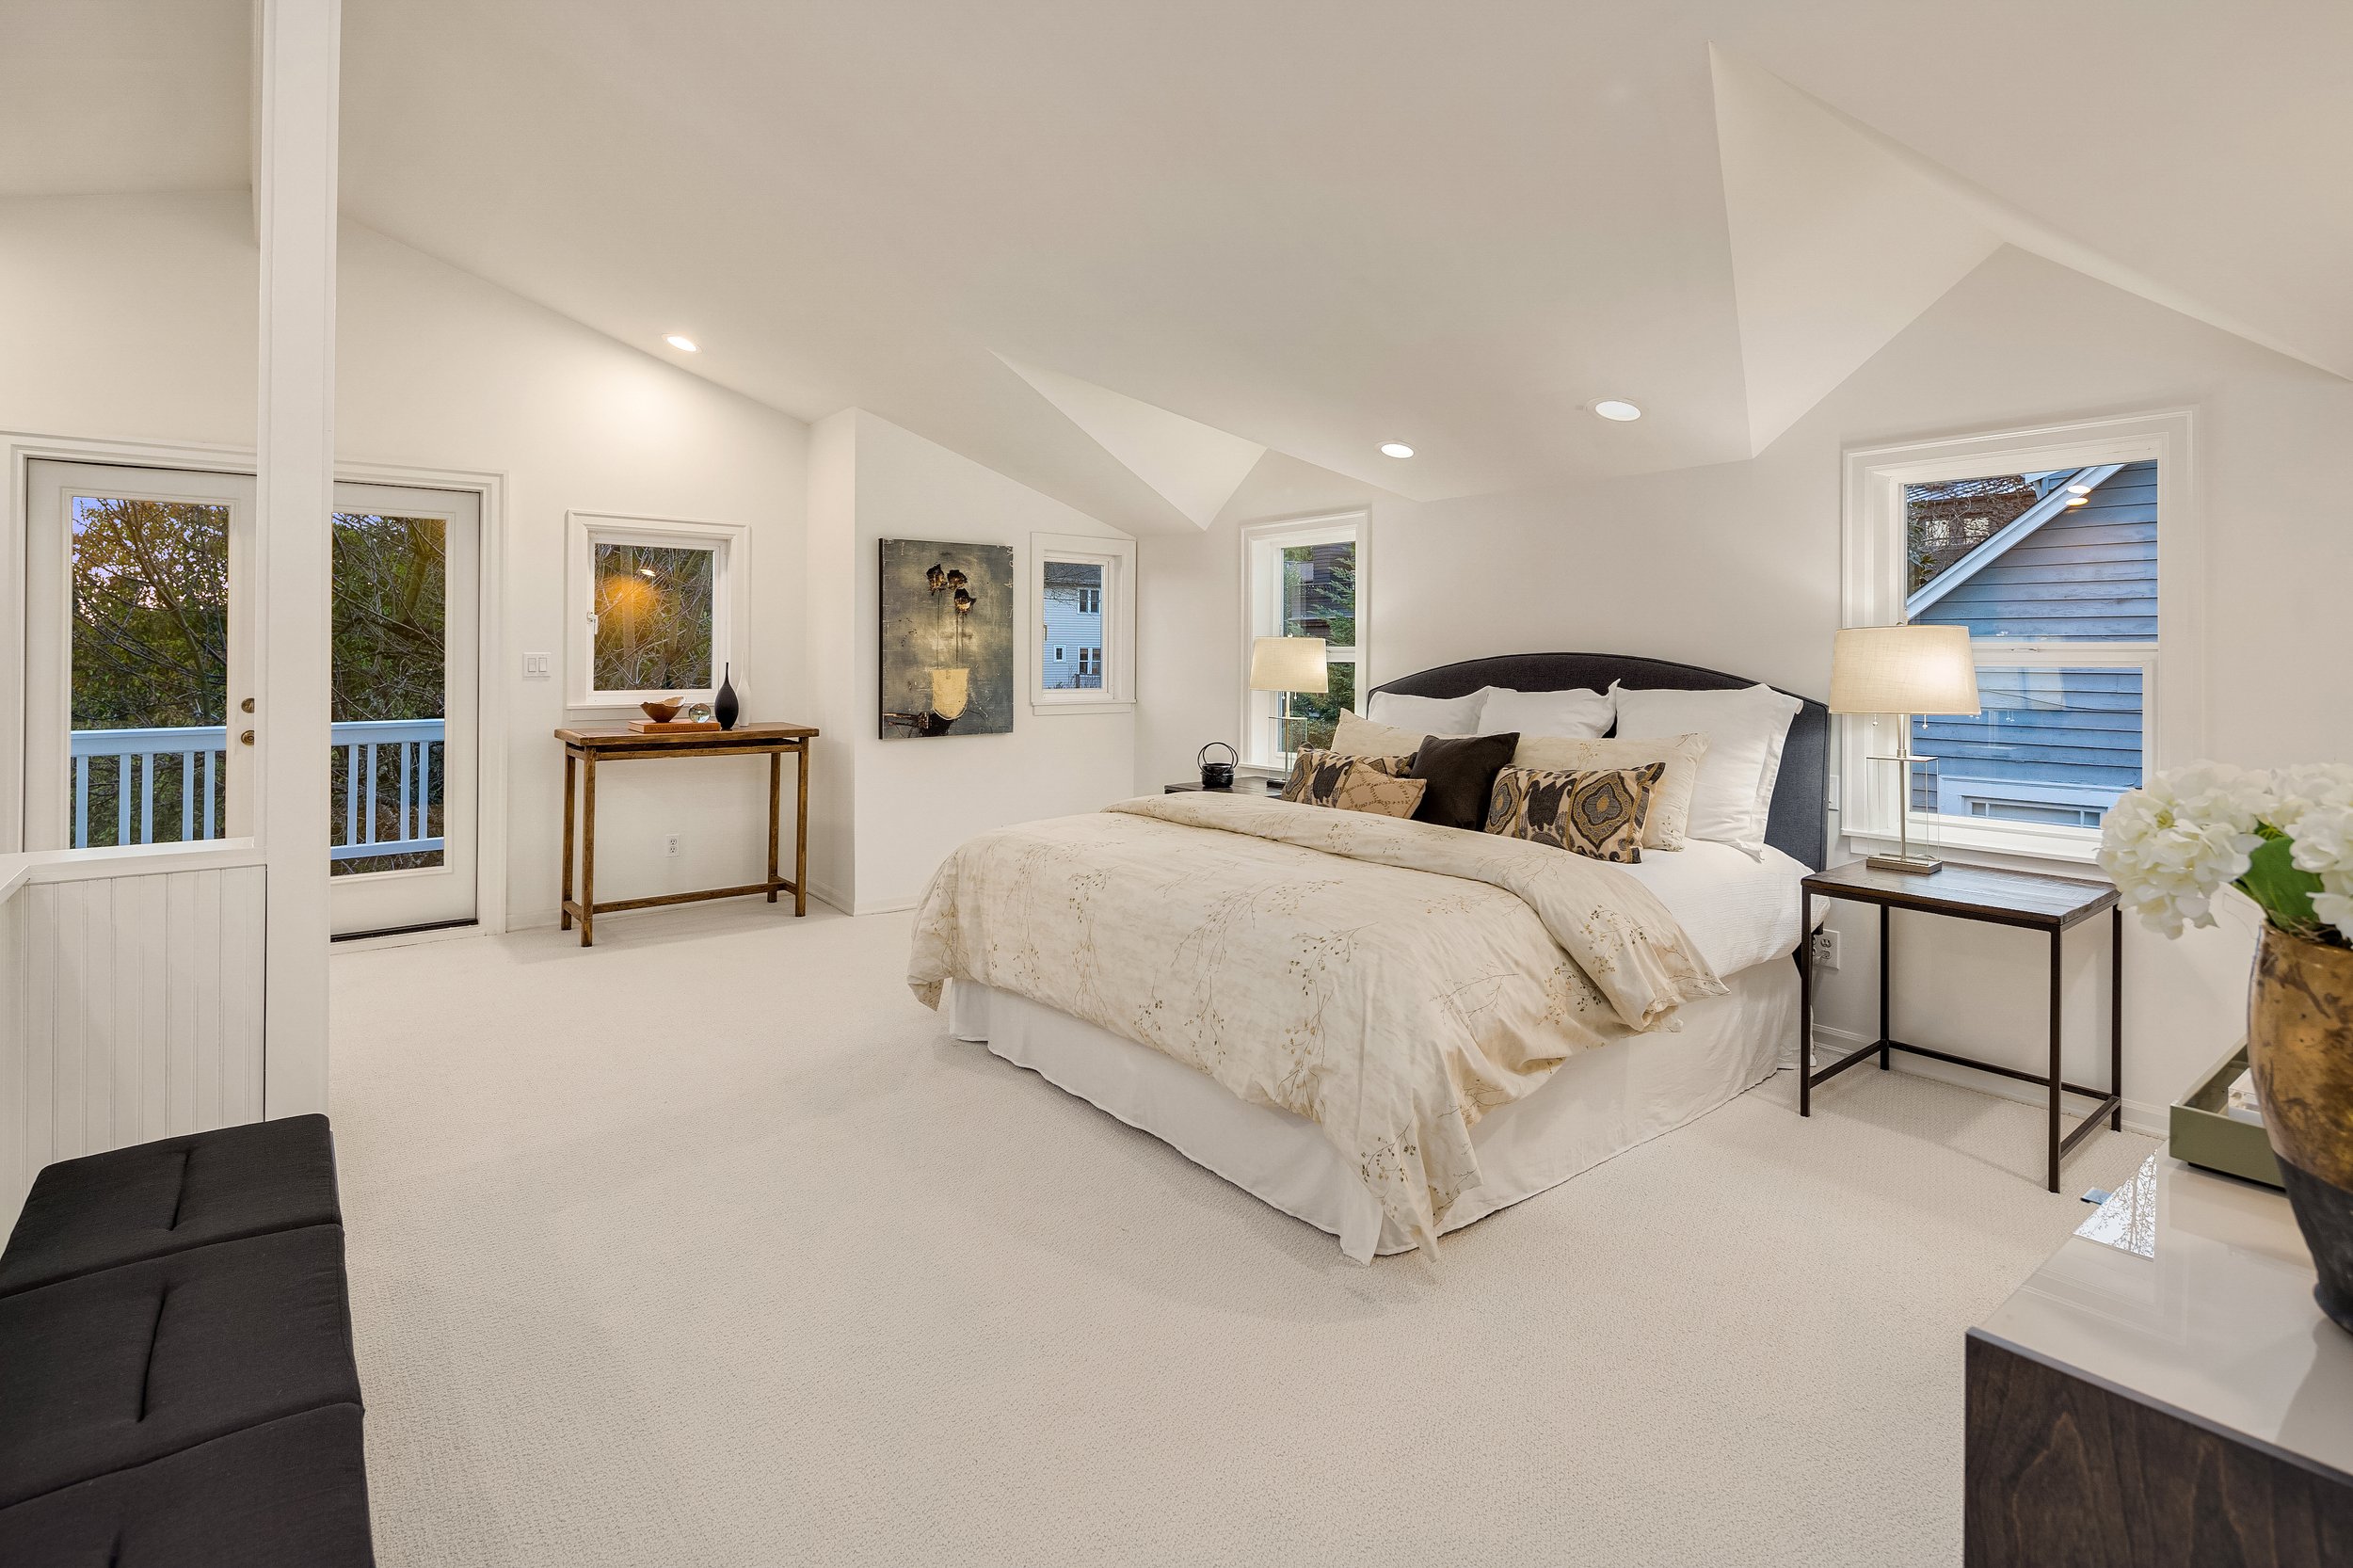  Cancel Monday and lose yourself in this luxurious primary suite. Encompassing the full upper level with vaulted ceilings, new wool carpet, lavish updated bath, huge walk in closet + territorial view deck, this is the ultimate reprieve. 